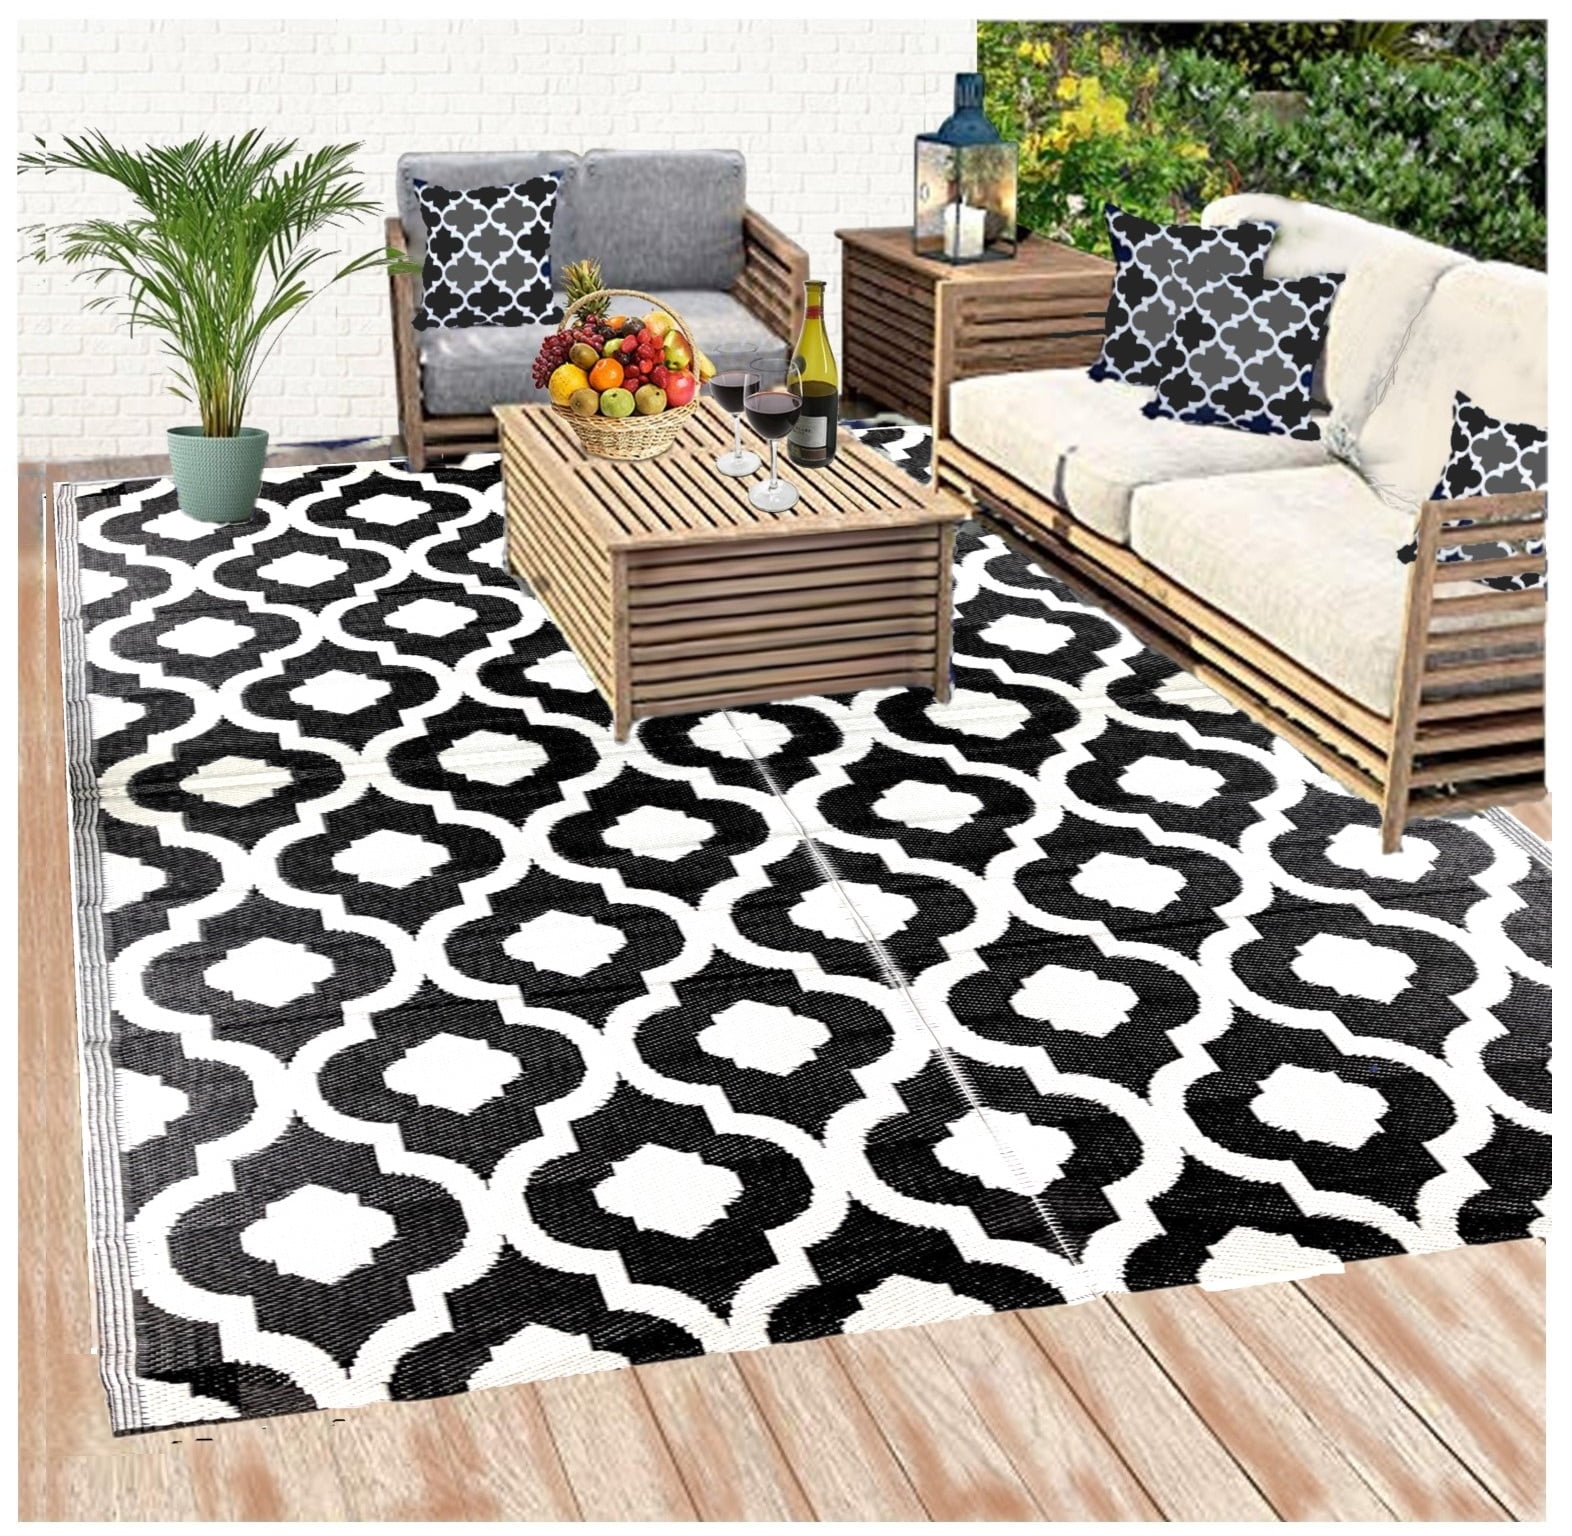 Outdoor Rugs for Patio 6x9ft, Reversible Plastic Straw Rug, RV Camping  Waterproof, Portable Carpet Area Rug for Camping, Deck Garden, Porch and  Balcony, Black & White, Bohemia 